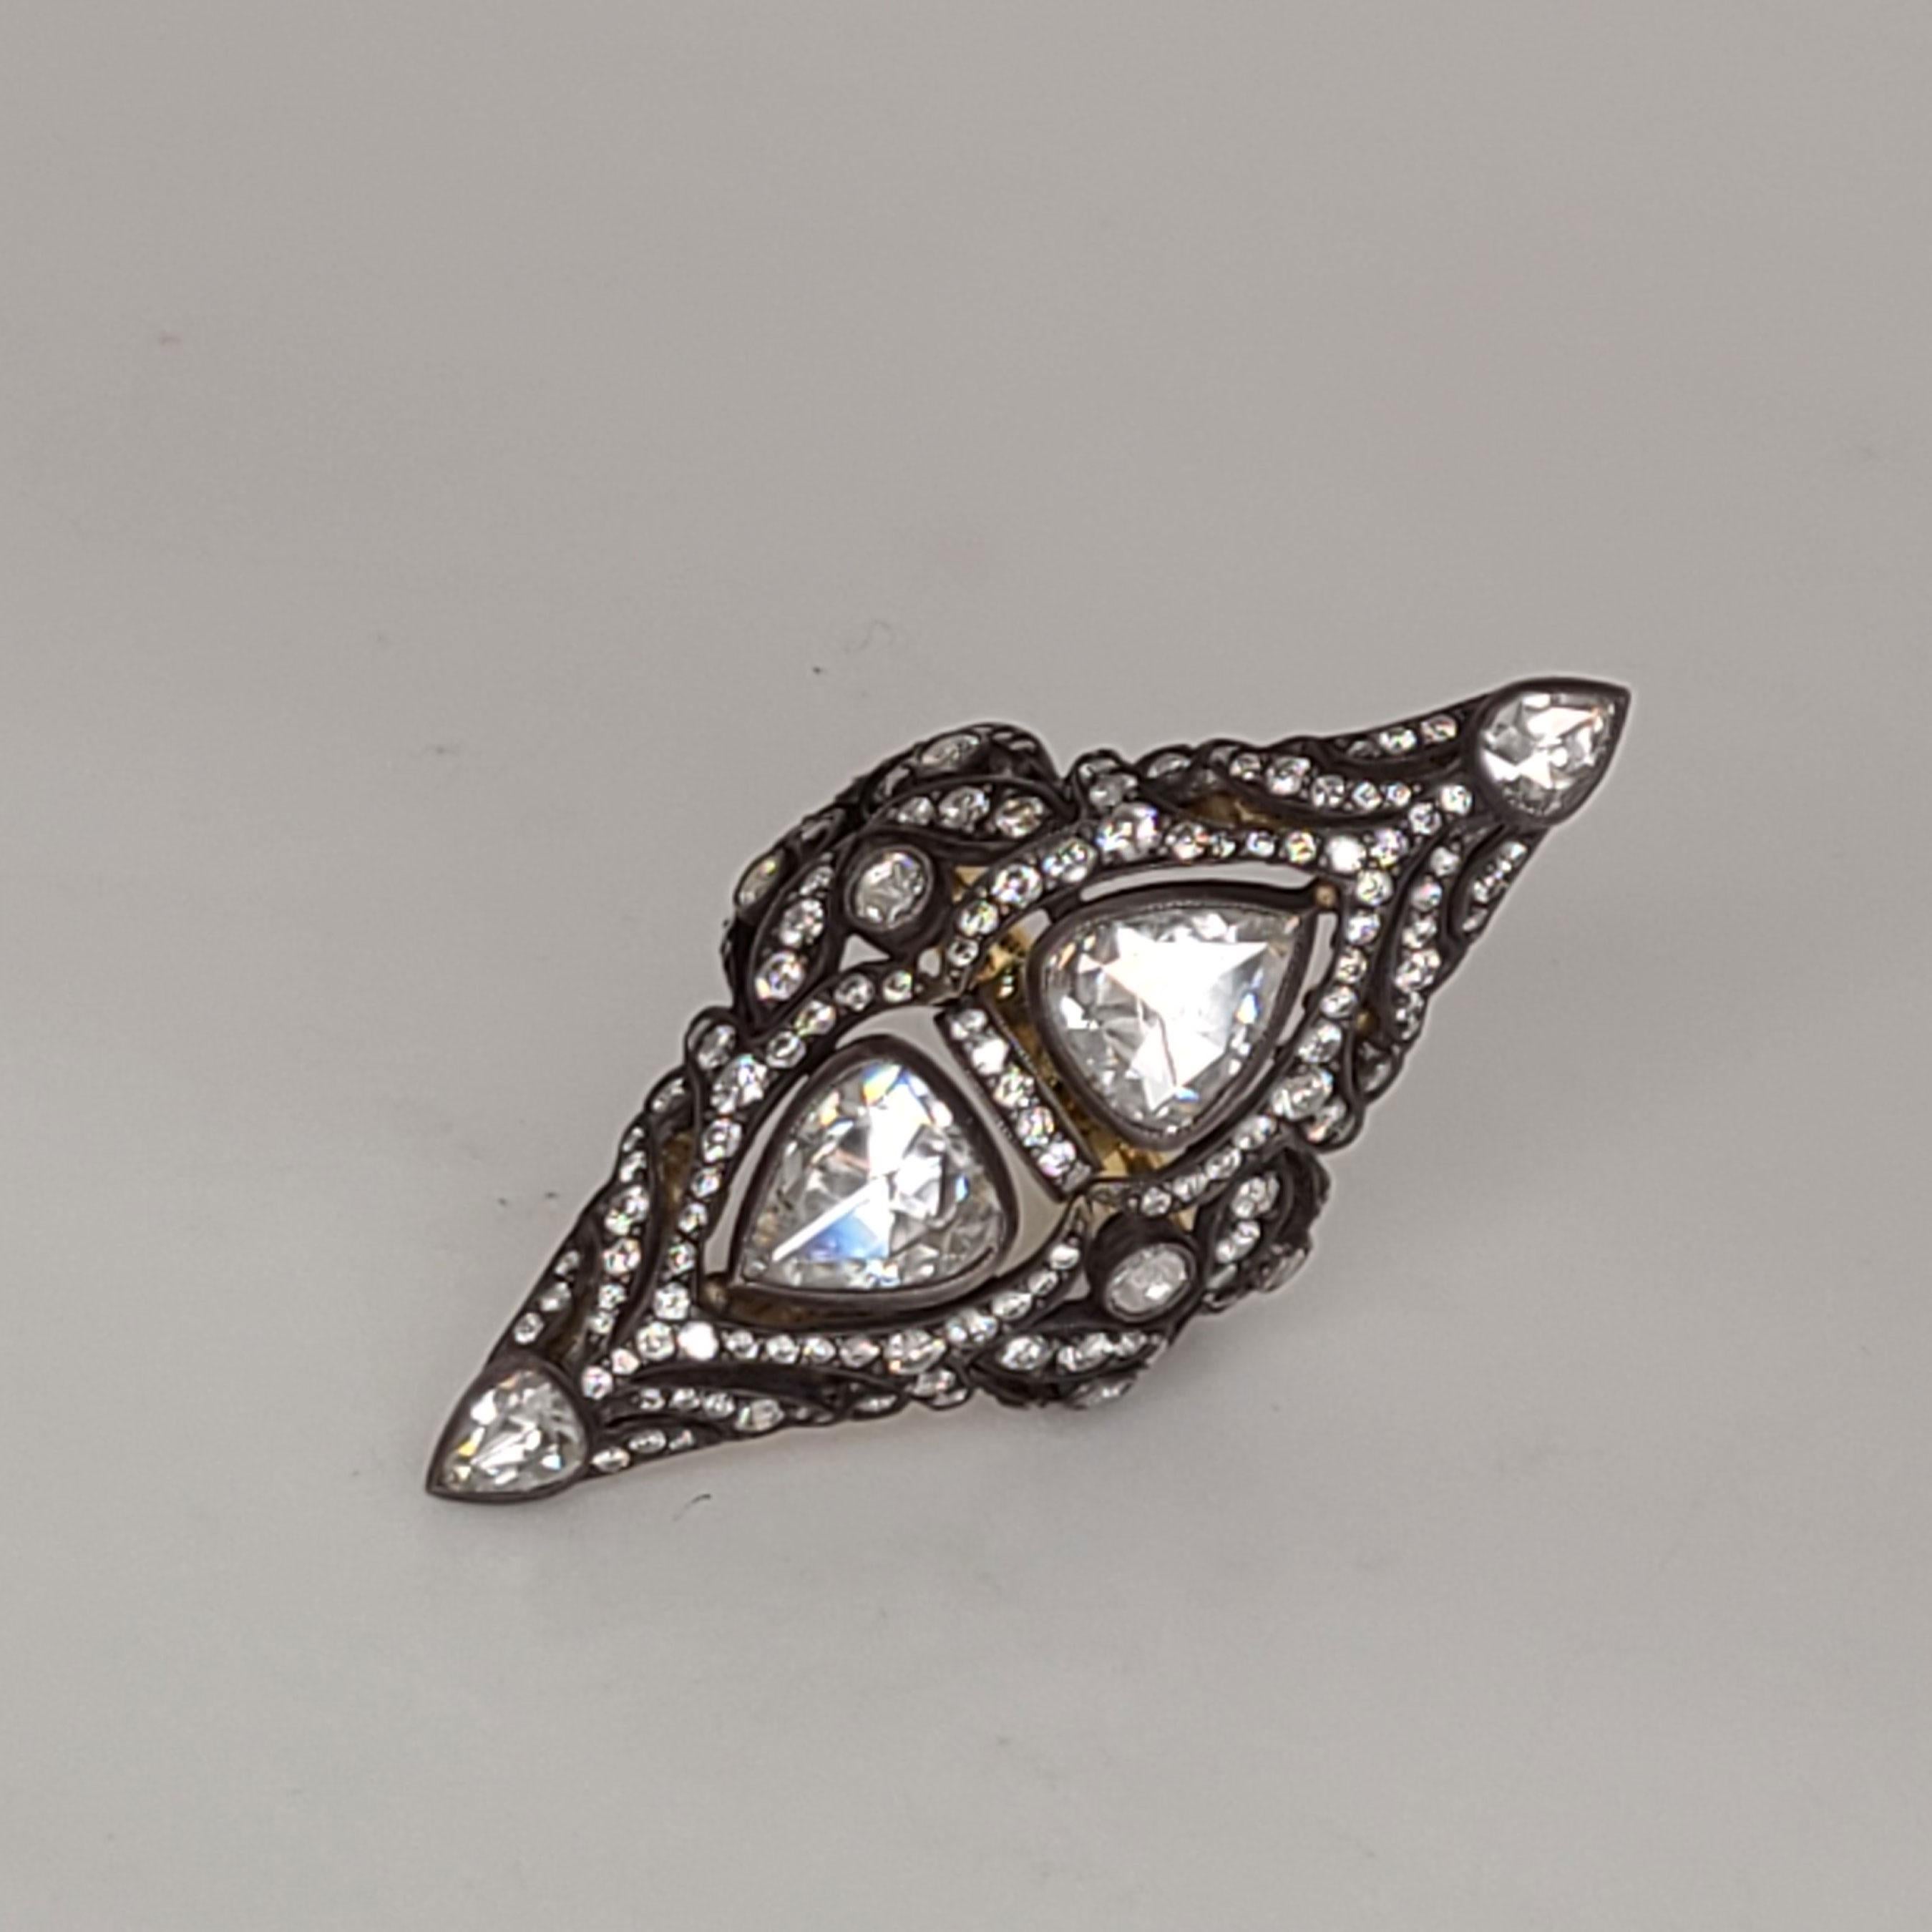 This one of a kind 18K Gold Ring has 2 pear shape rose-cut Diamonds about 1cts each of them. The accent Diamonds complementing the rose-cut Diamonds are 1.65cts. This ring is 5.75 in size as is and can be resized upon order. The ring is made of 18K